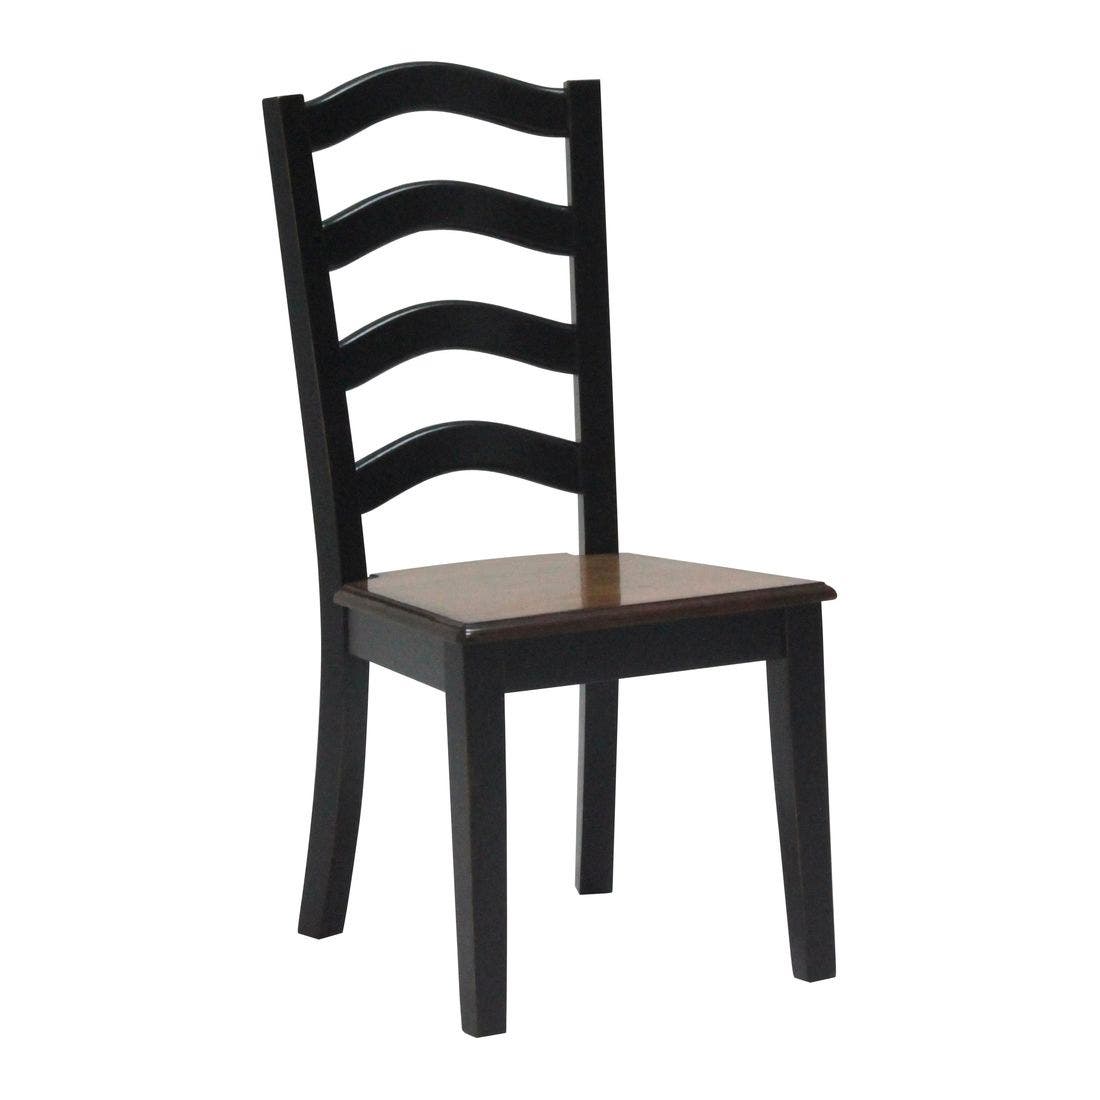 19150756-achelle-furniture-dining-room-chairs-01